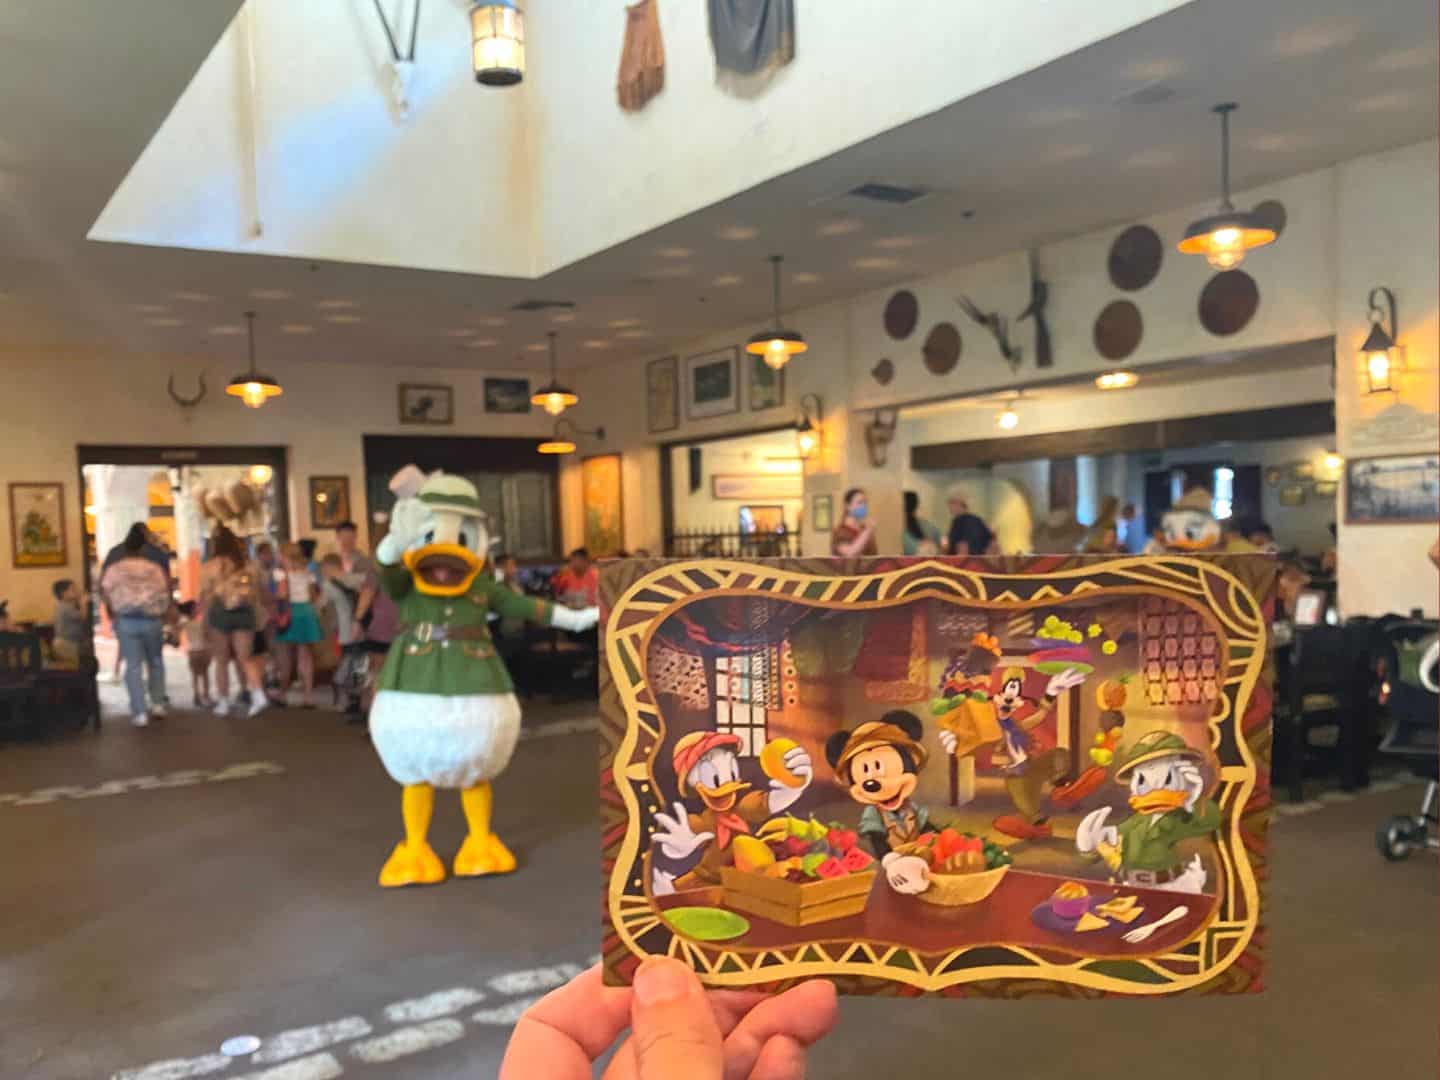 Character Card at Tusker House Restaurant with Daisy, Mickey, Donald, and Goofy illustrated on the front 